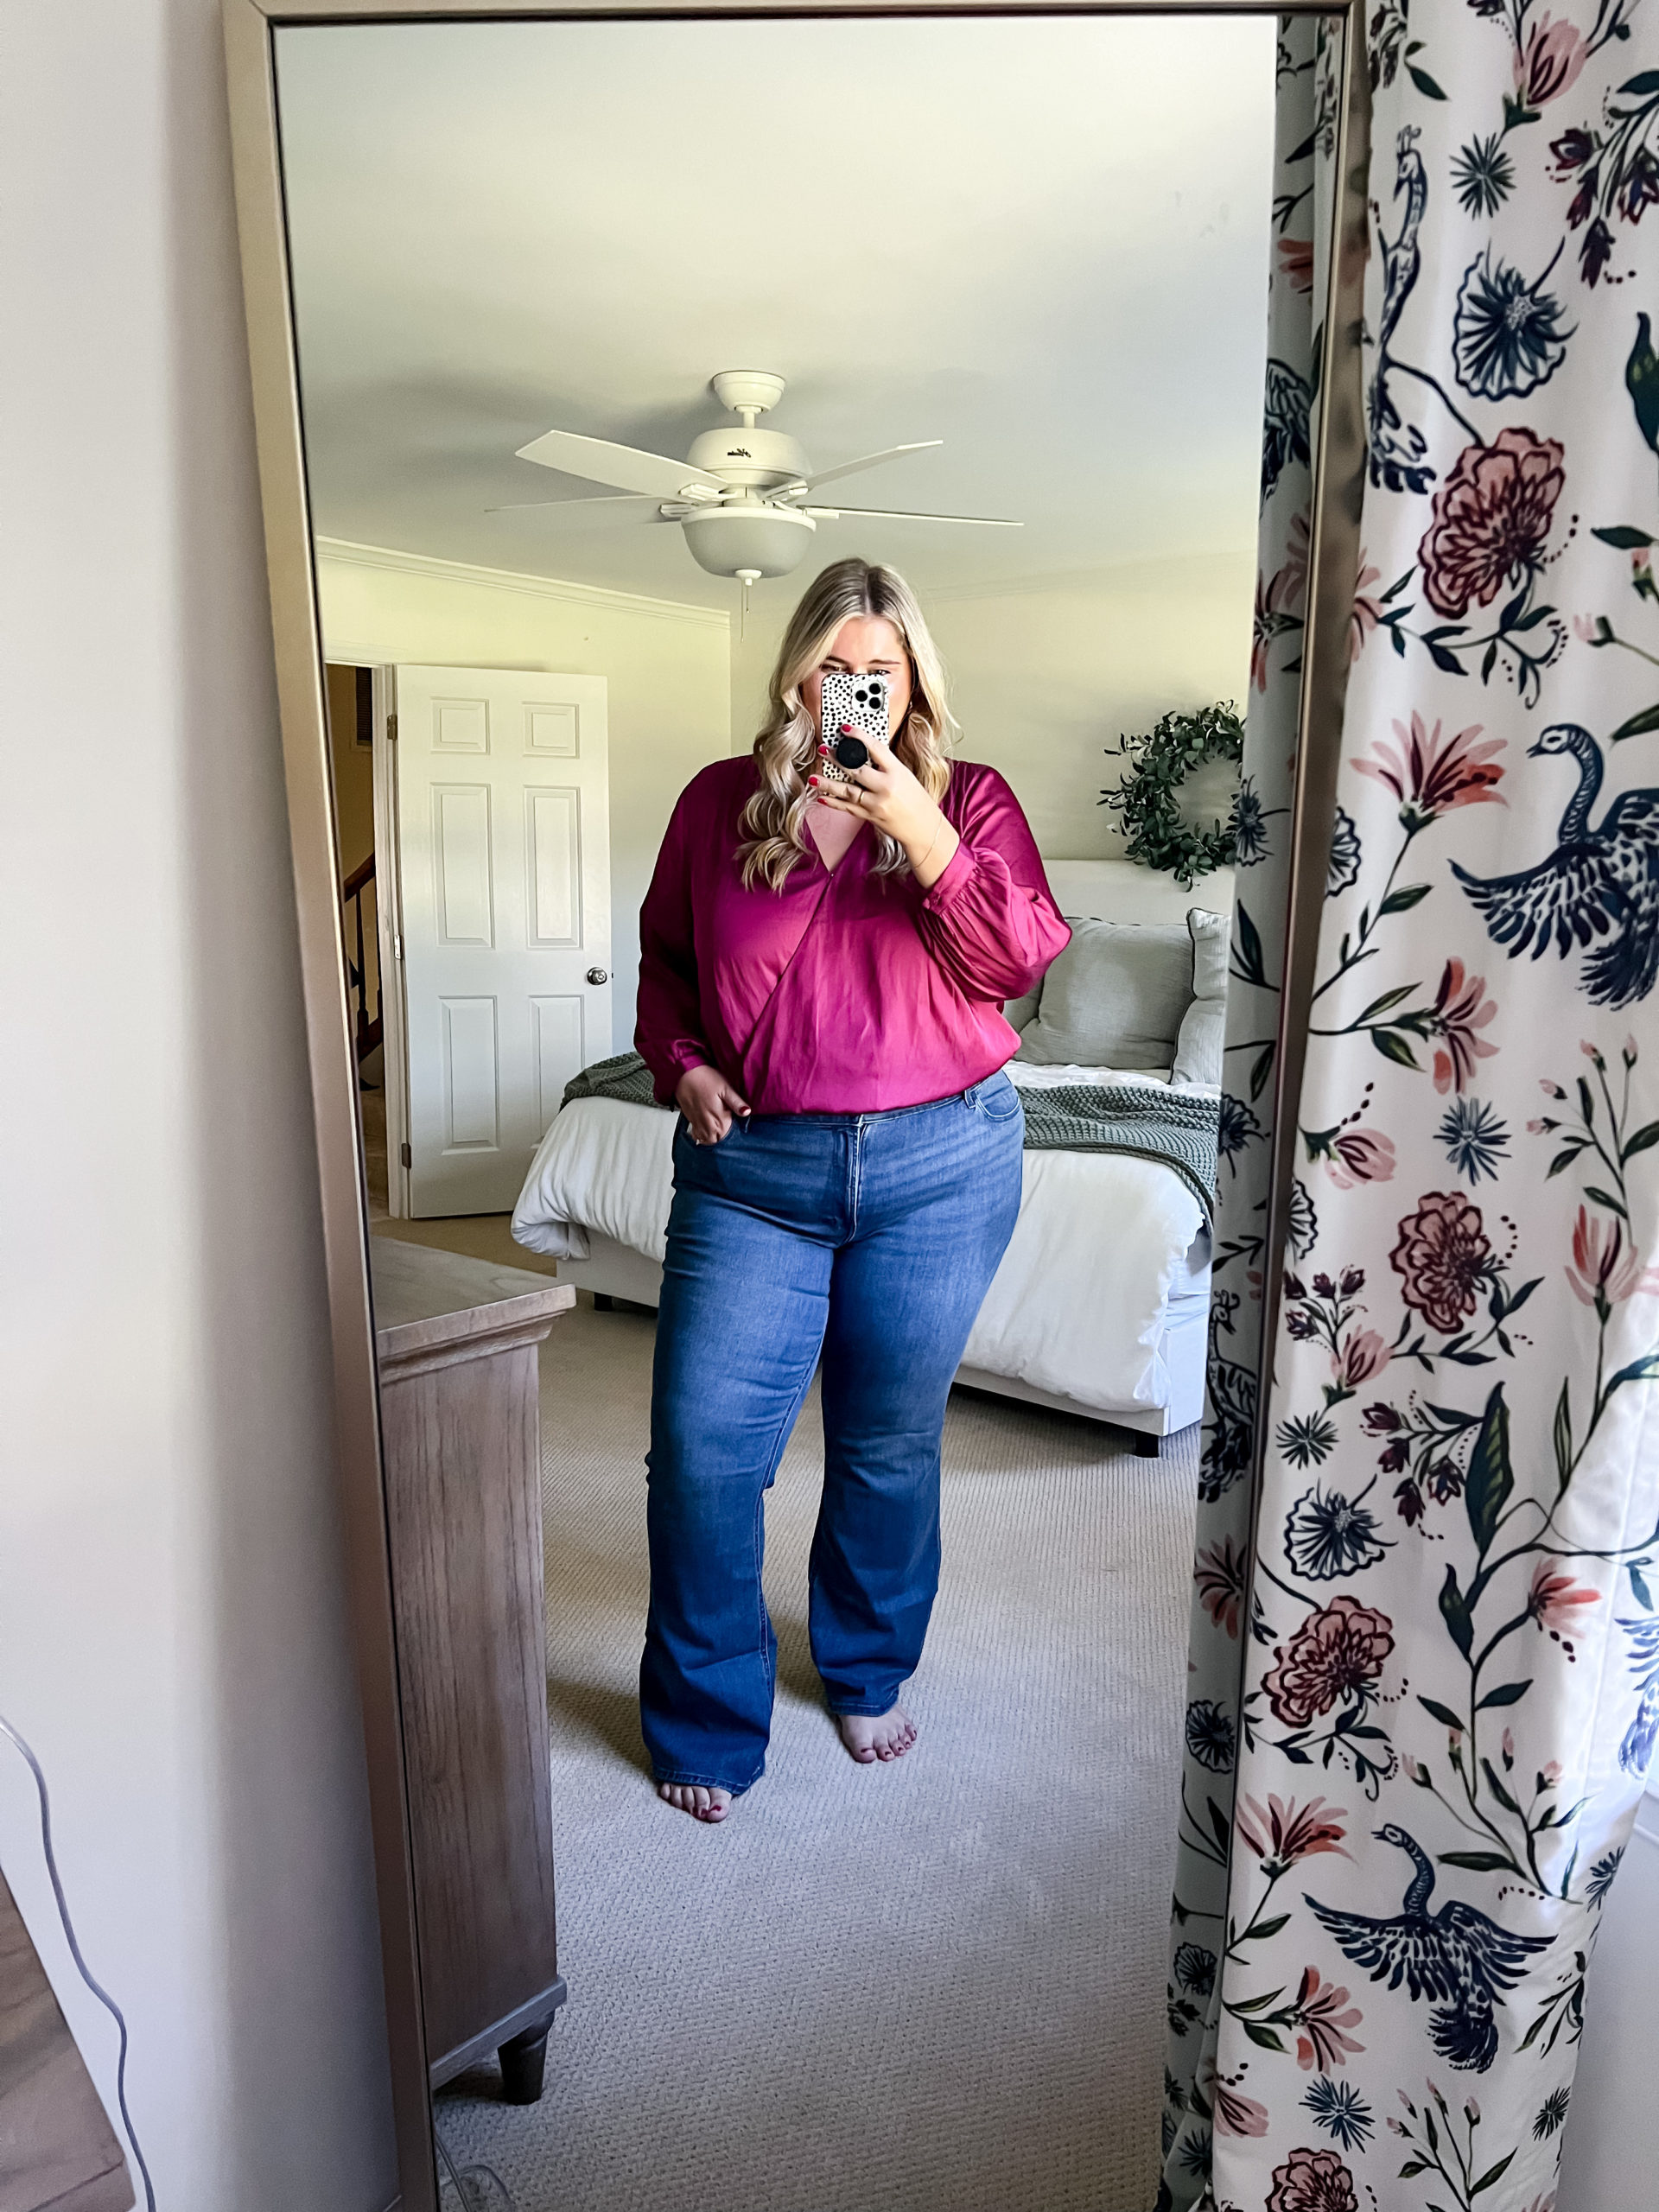 Old Navy Extra High-Waisted A-Line Wide-Leg Jeans Review